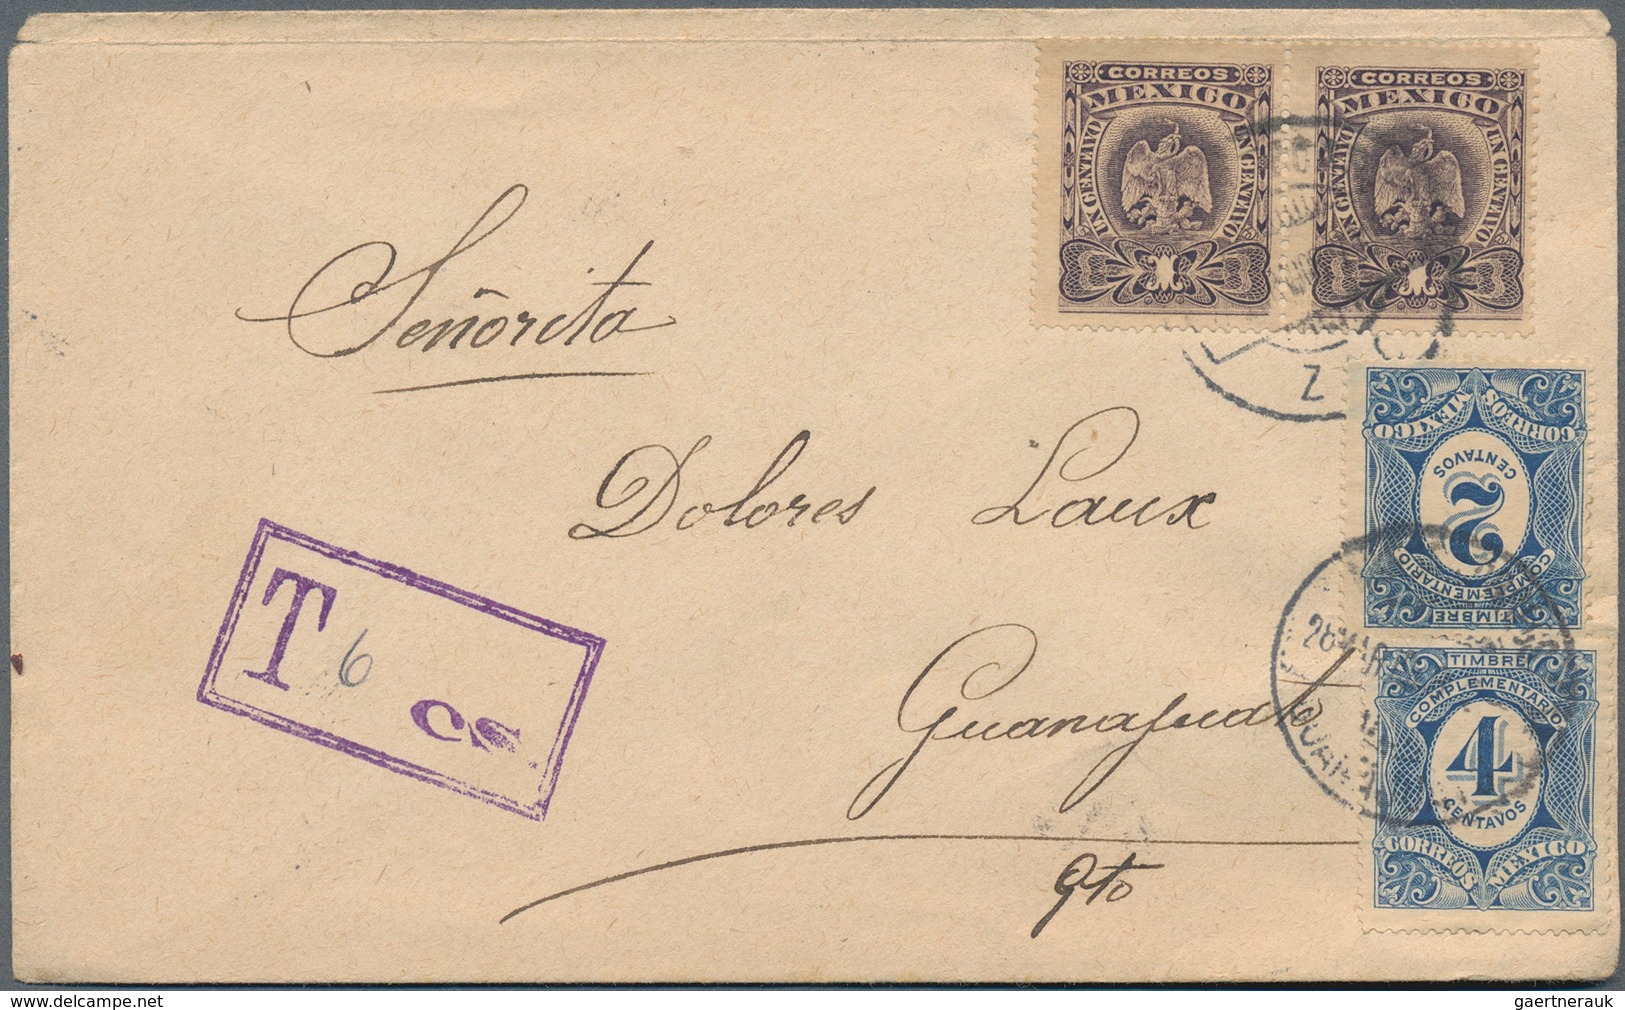 Mexiko: 1900's-1920's: 59 Covers And Postal Stationery Items, Mostly Used Inland From A Corresponden - Mexico